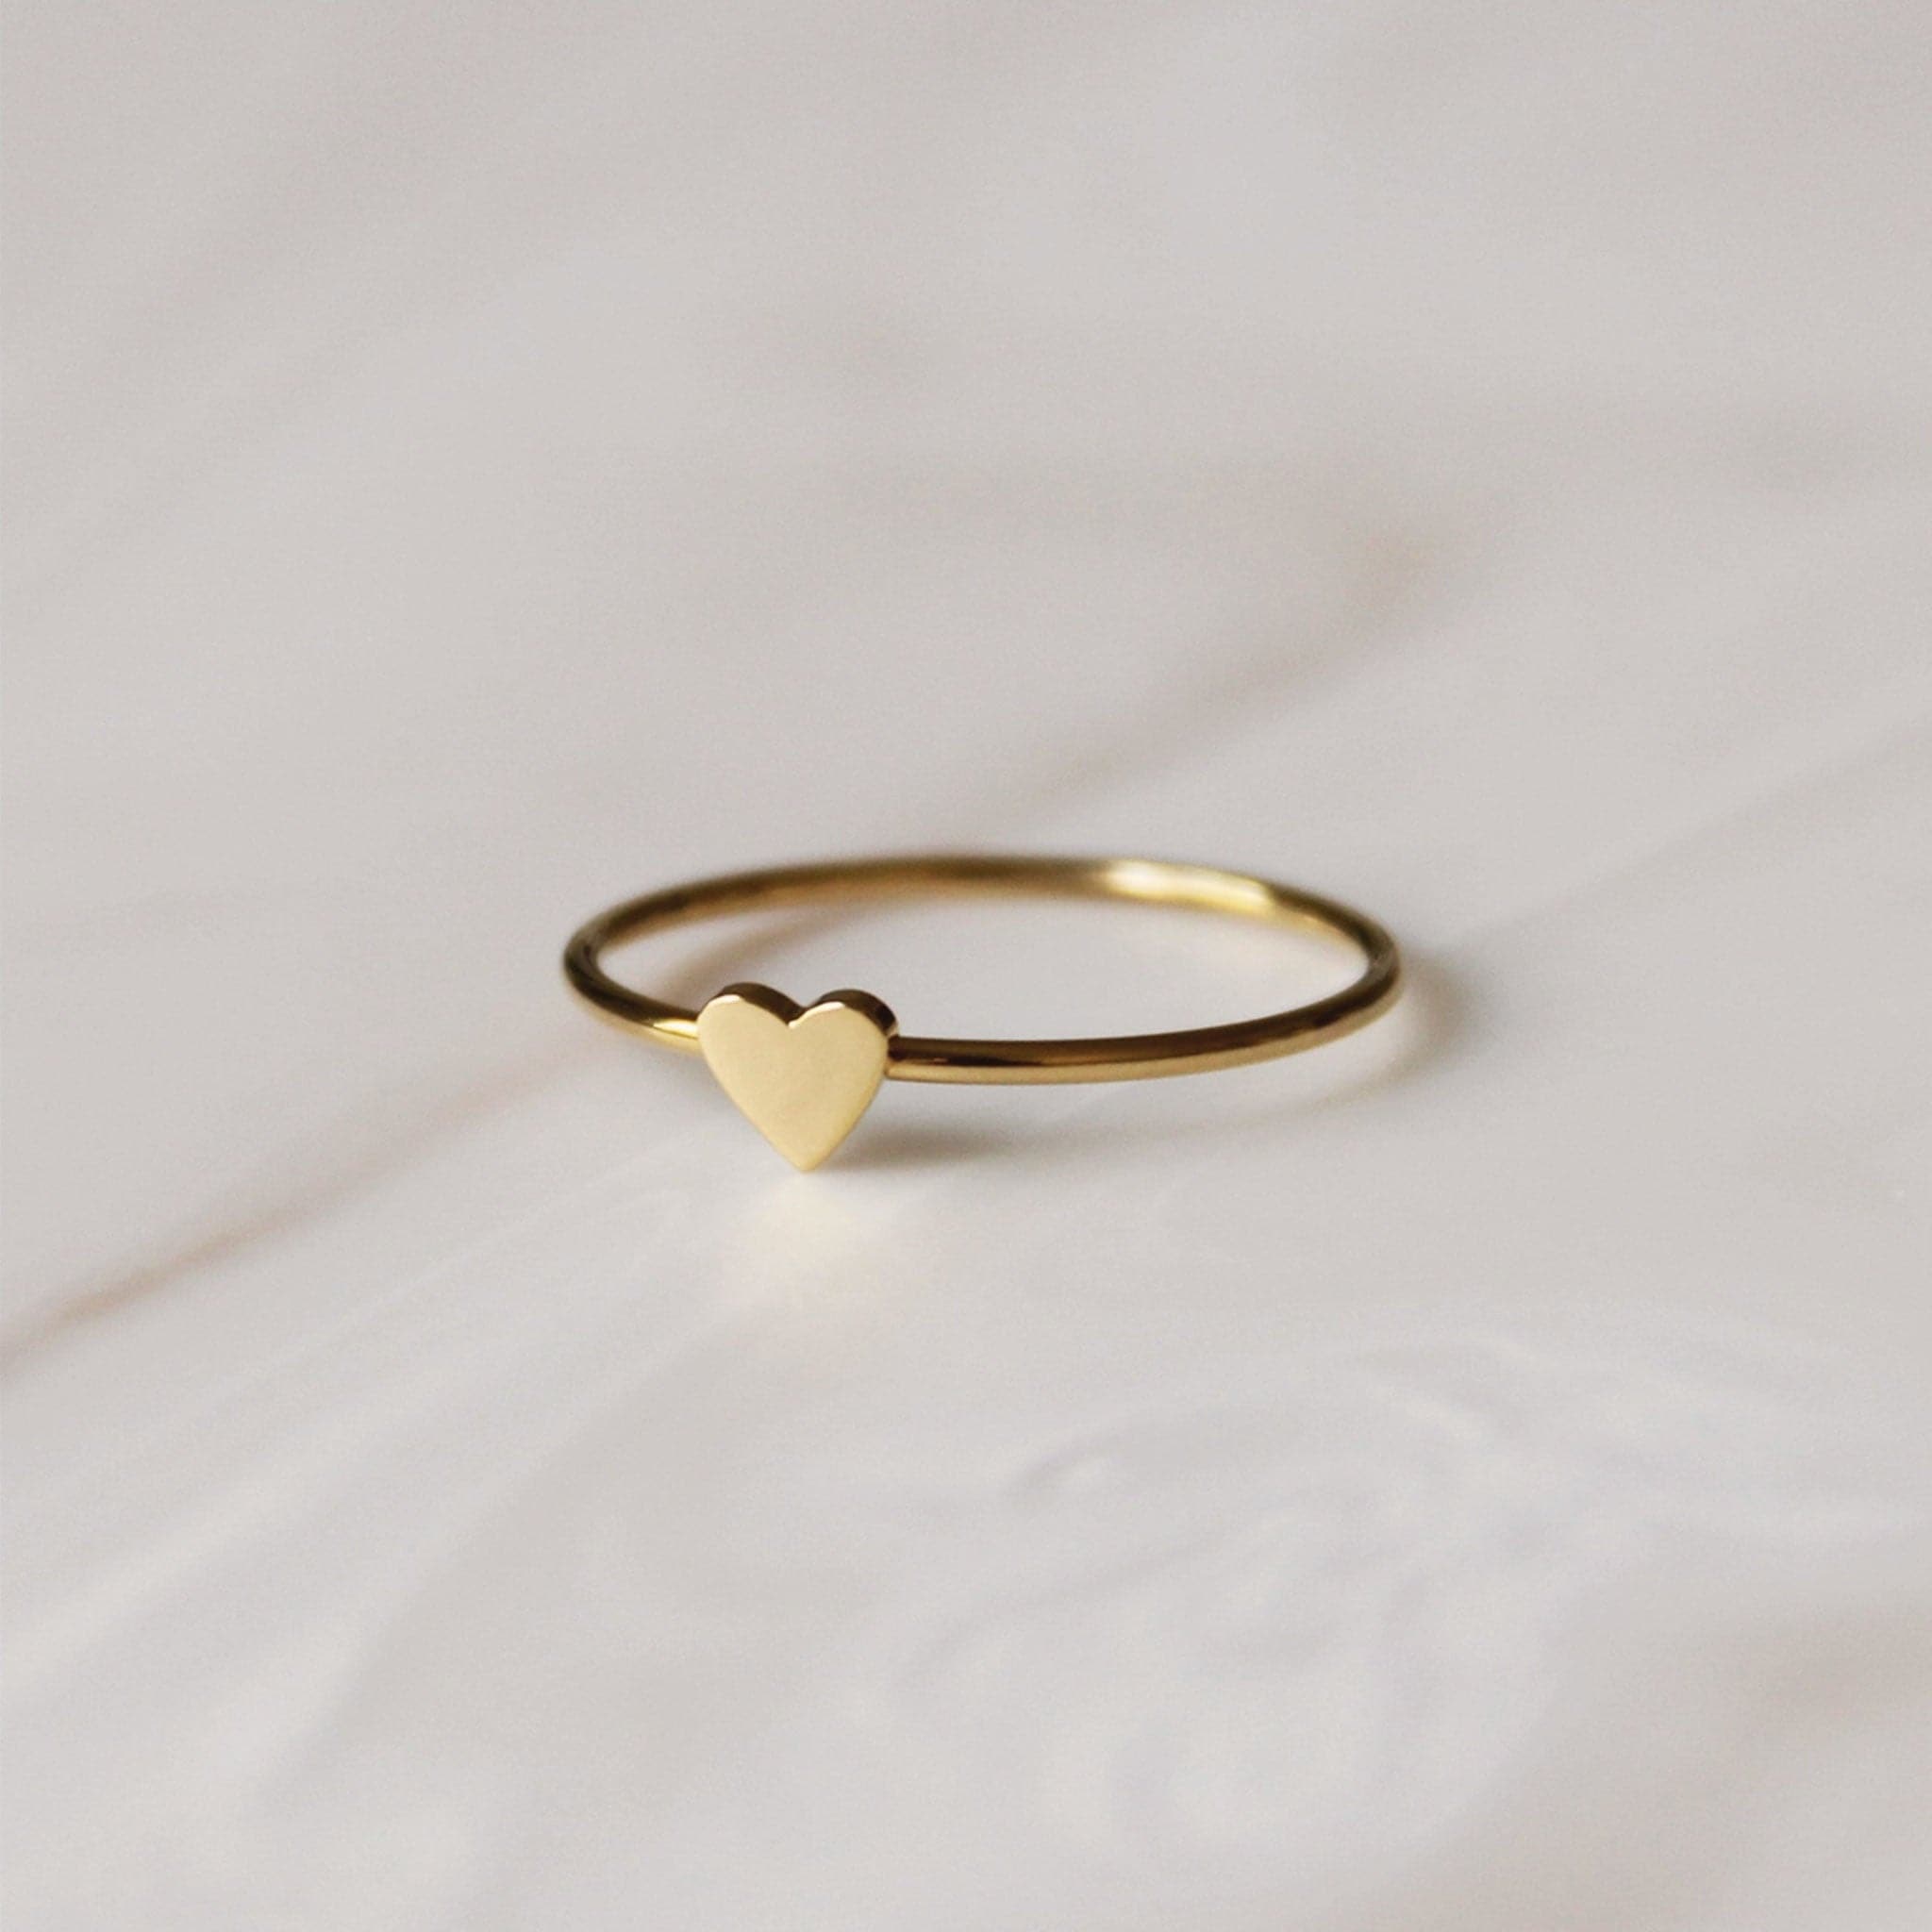 Photo of a thin gold ring with a small gold heart on it sitting on a marble surface.